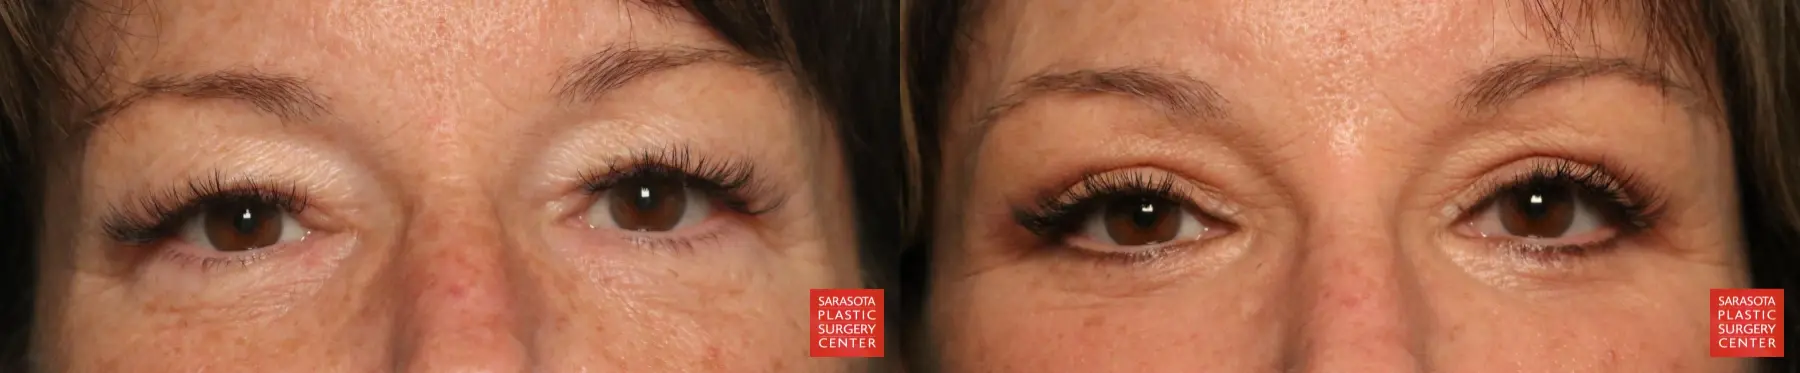 Eyelid Lift: Patient 67 - Before and After 1